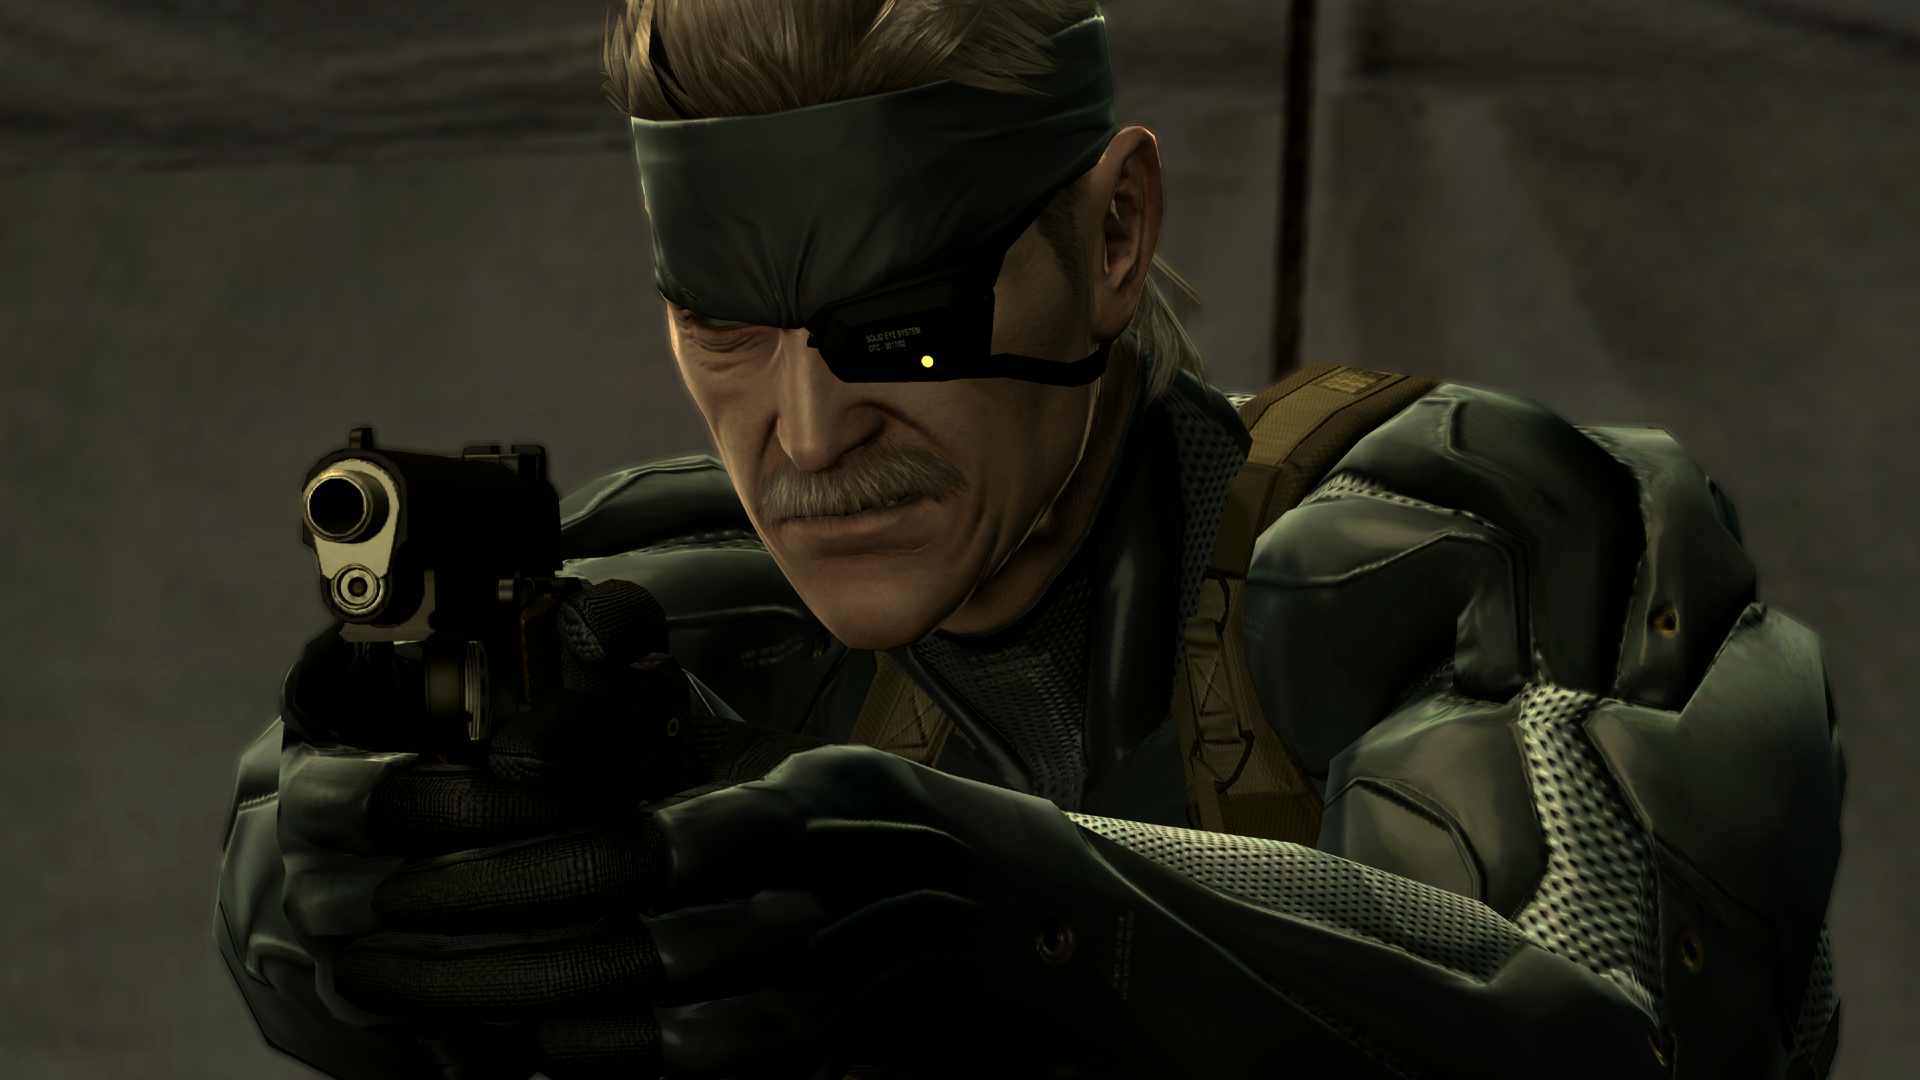 Snake in Metal Gear Solid 4 is at the epitome of his character development. | Source: eXputer